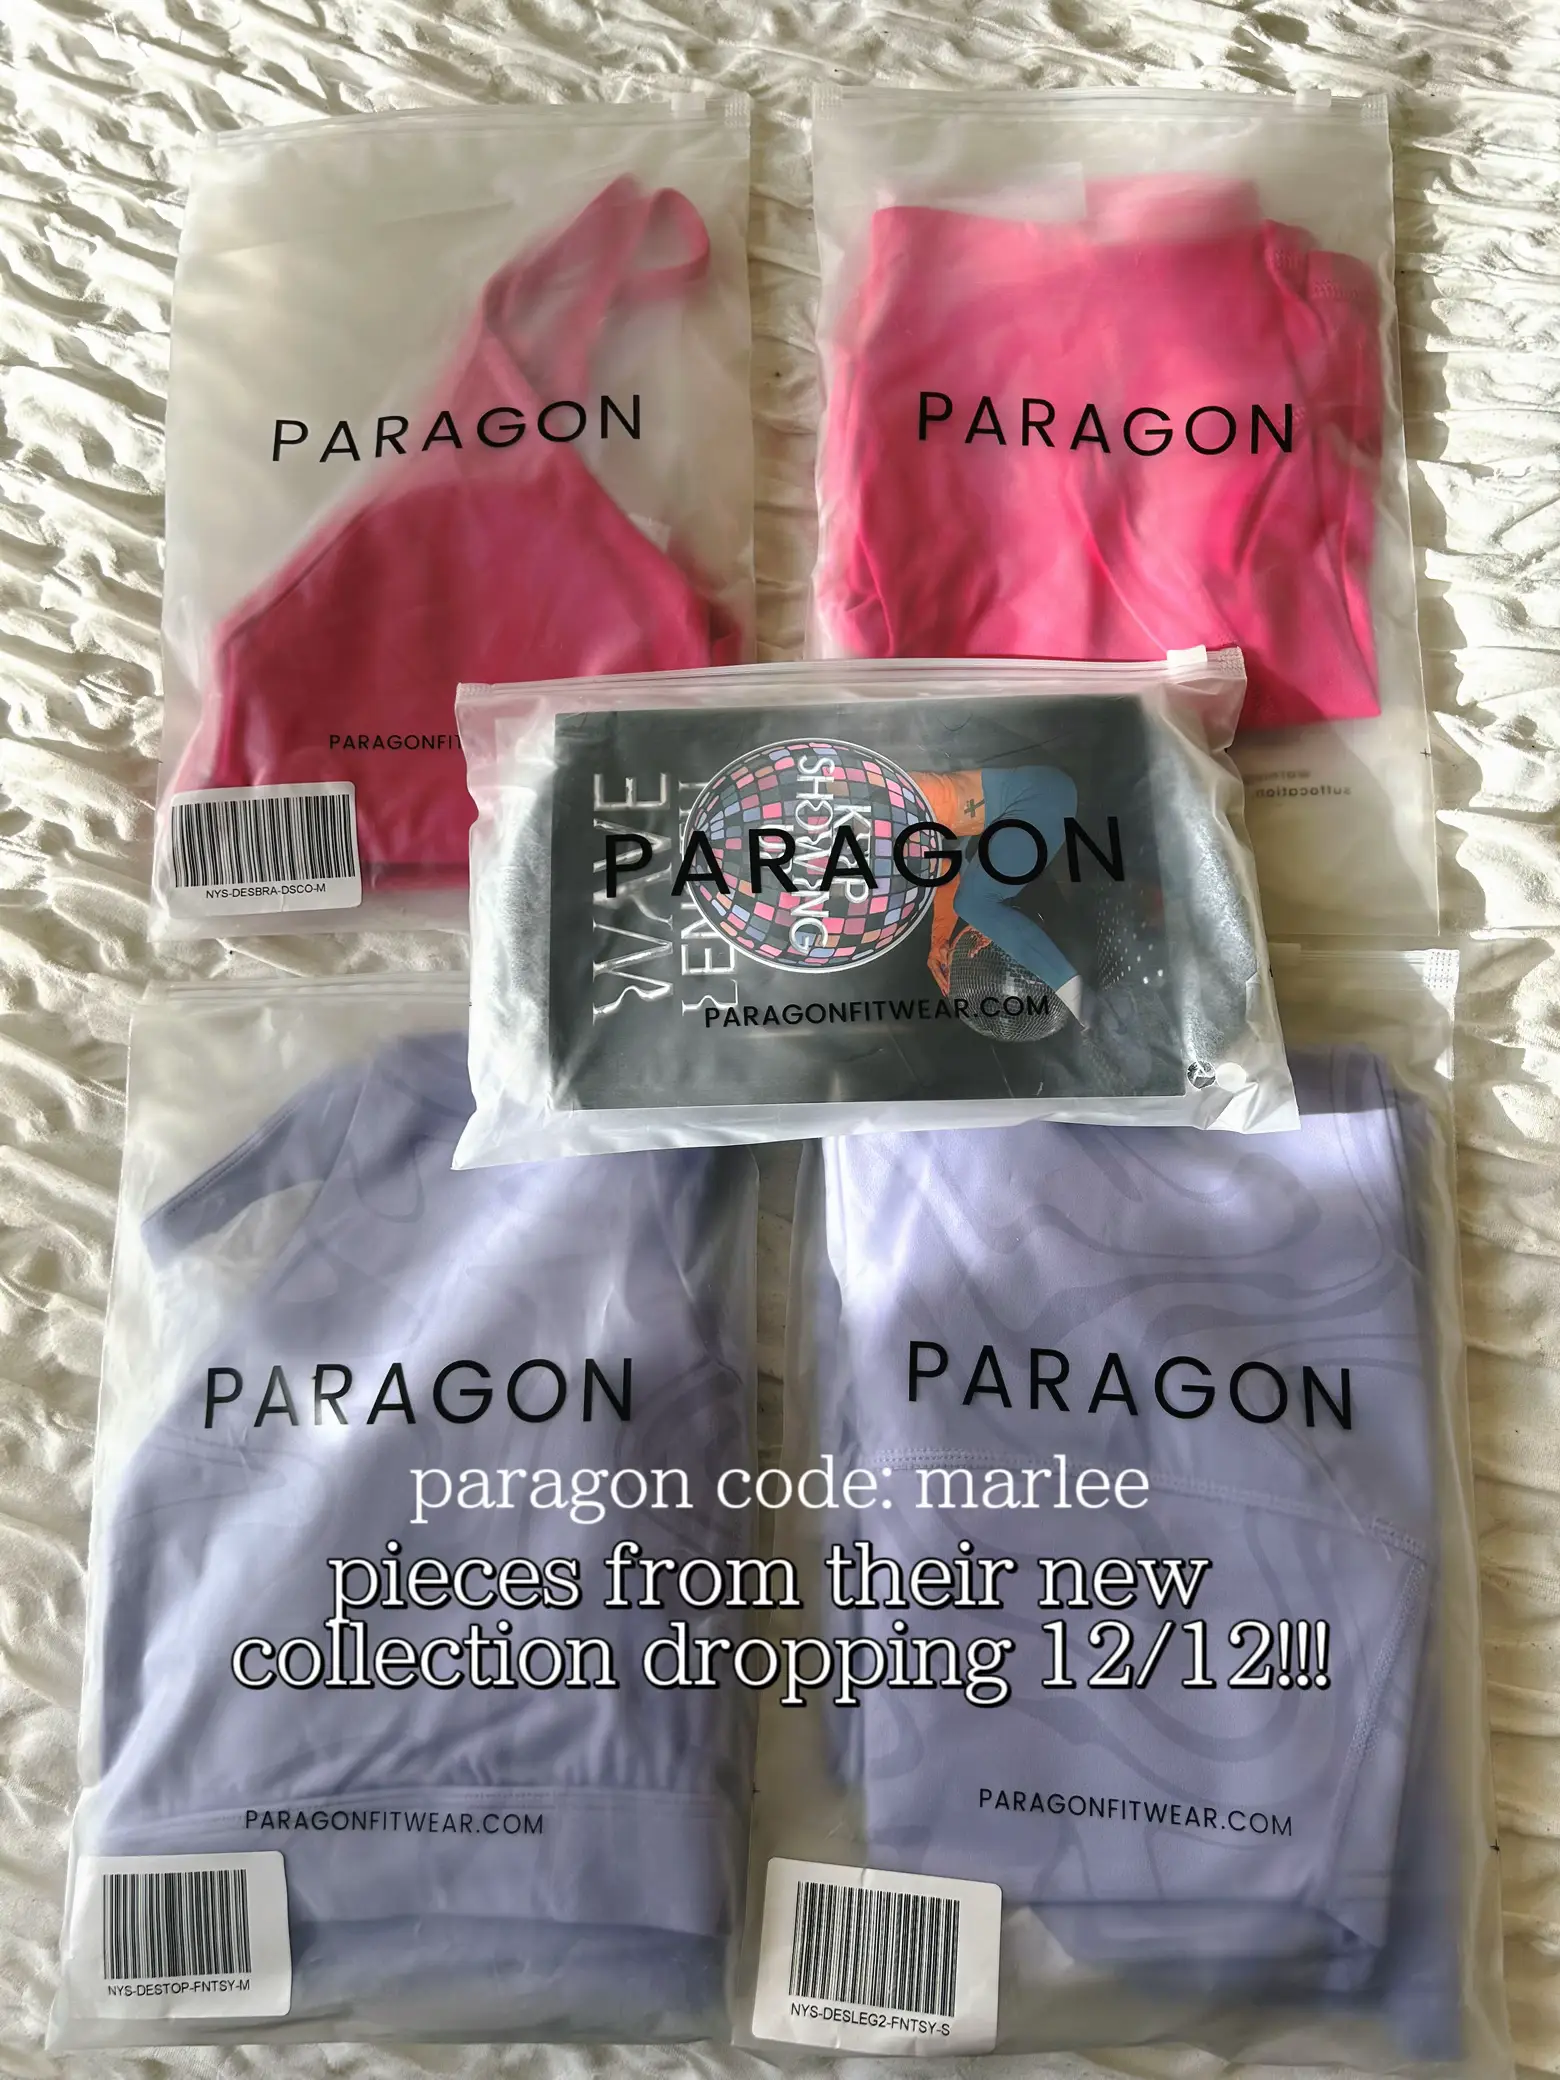 paragon fitwear 🫶🏼, Gallery posted by marlee brower👼🏻